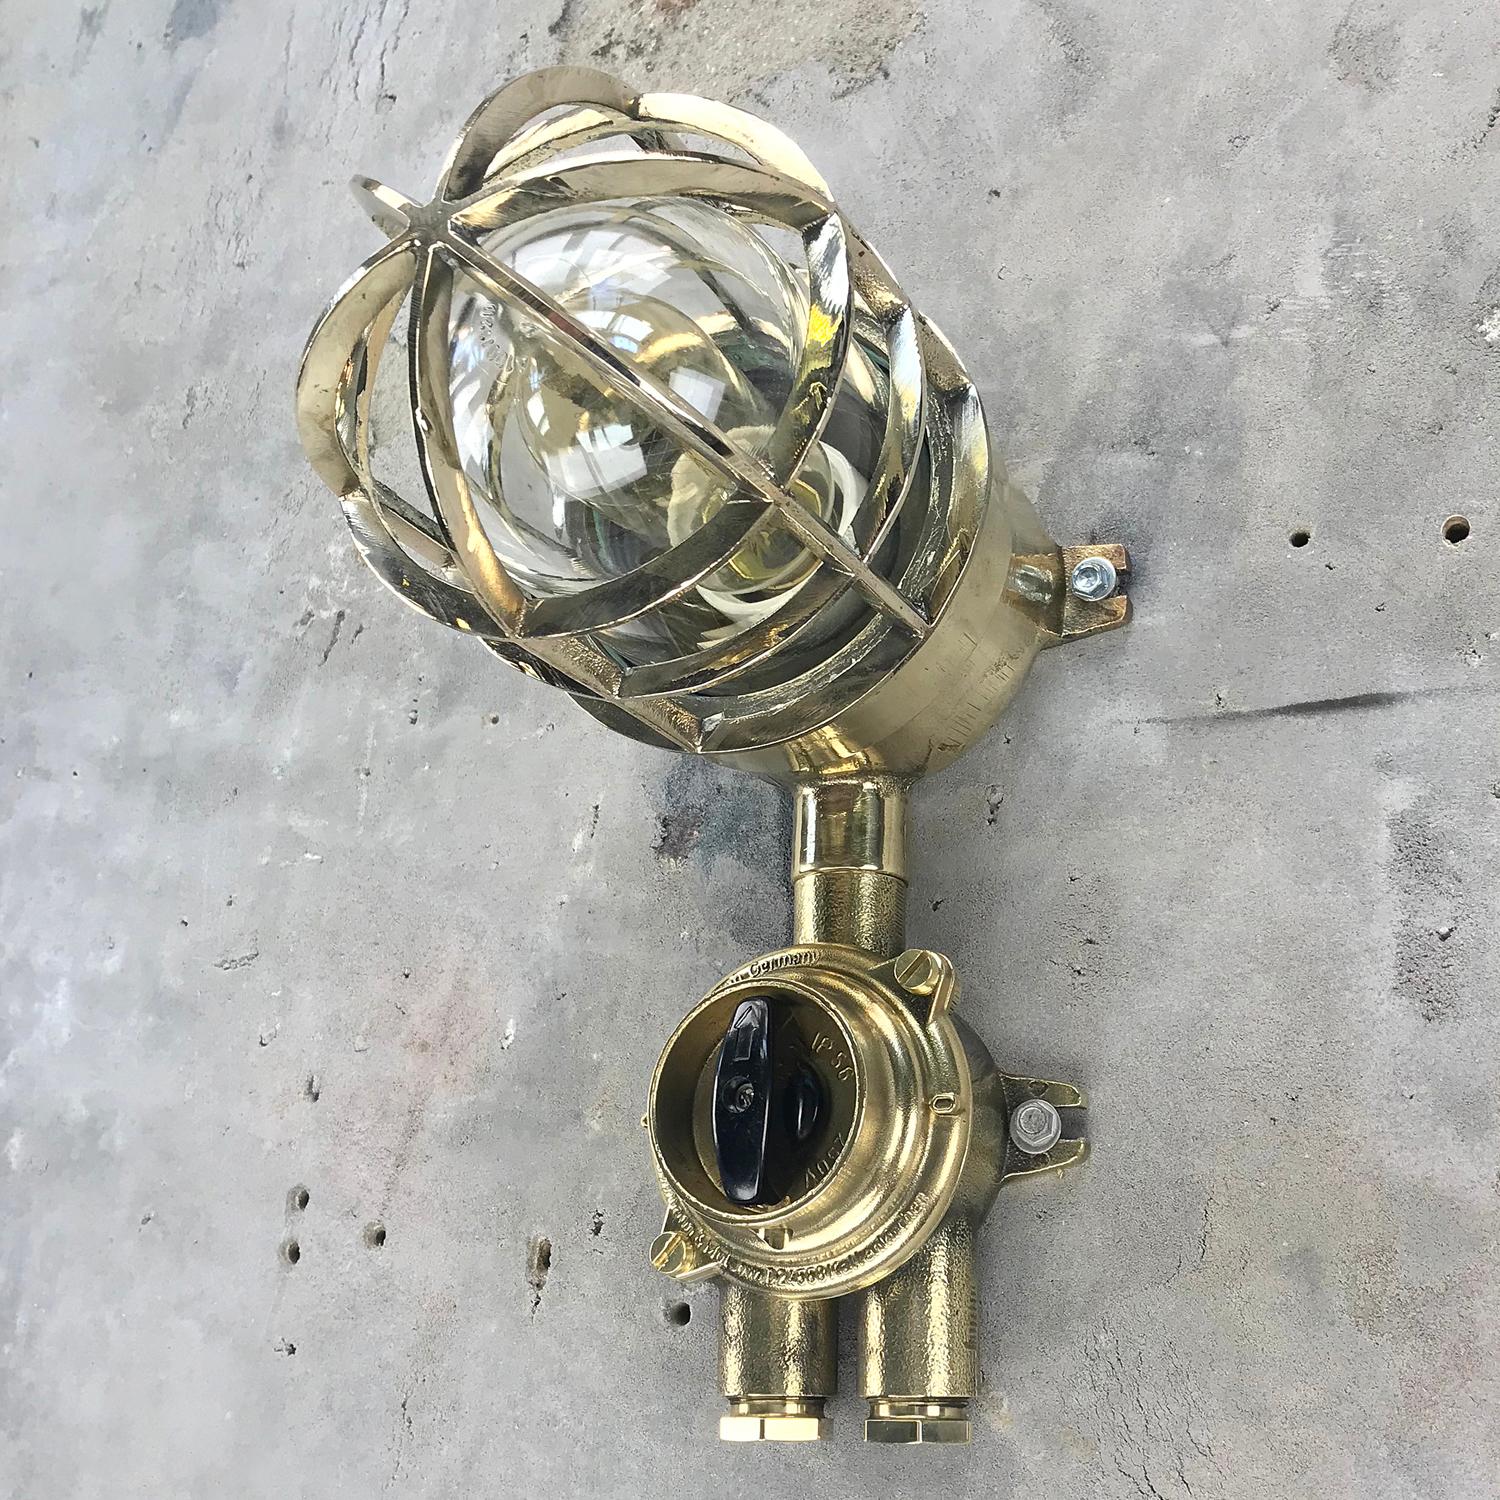 1970s German Explosion Proof Wall Light Cast Brass, Glass Shade & Rotary Switch For Sale 12